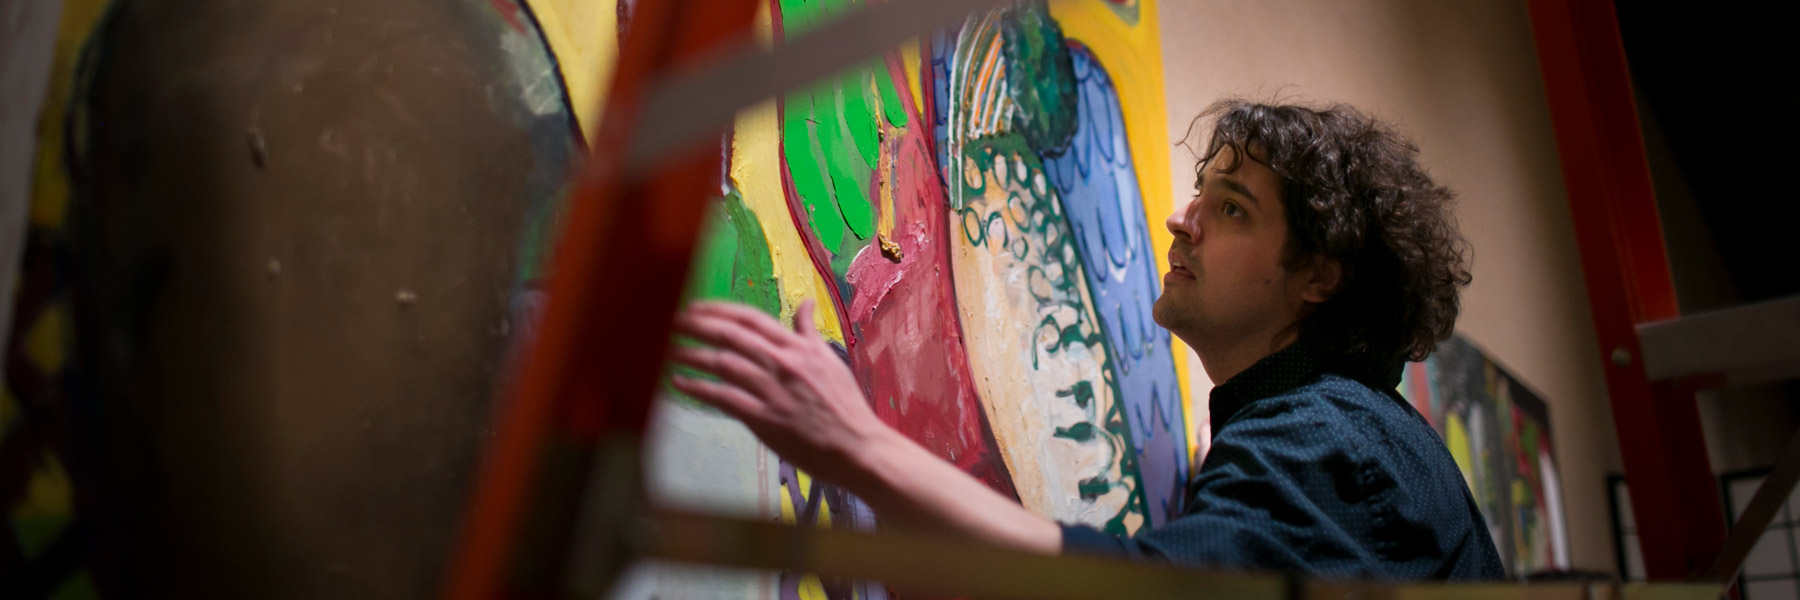 A student is placing artwork on a wall.